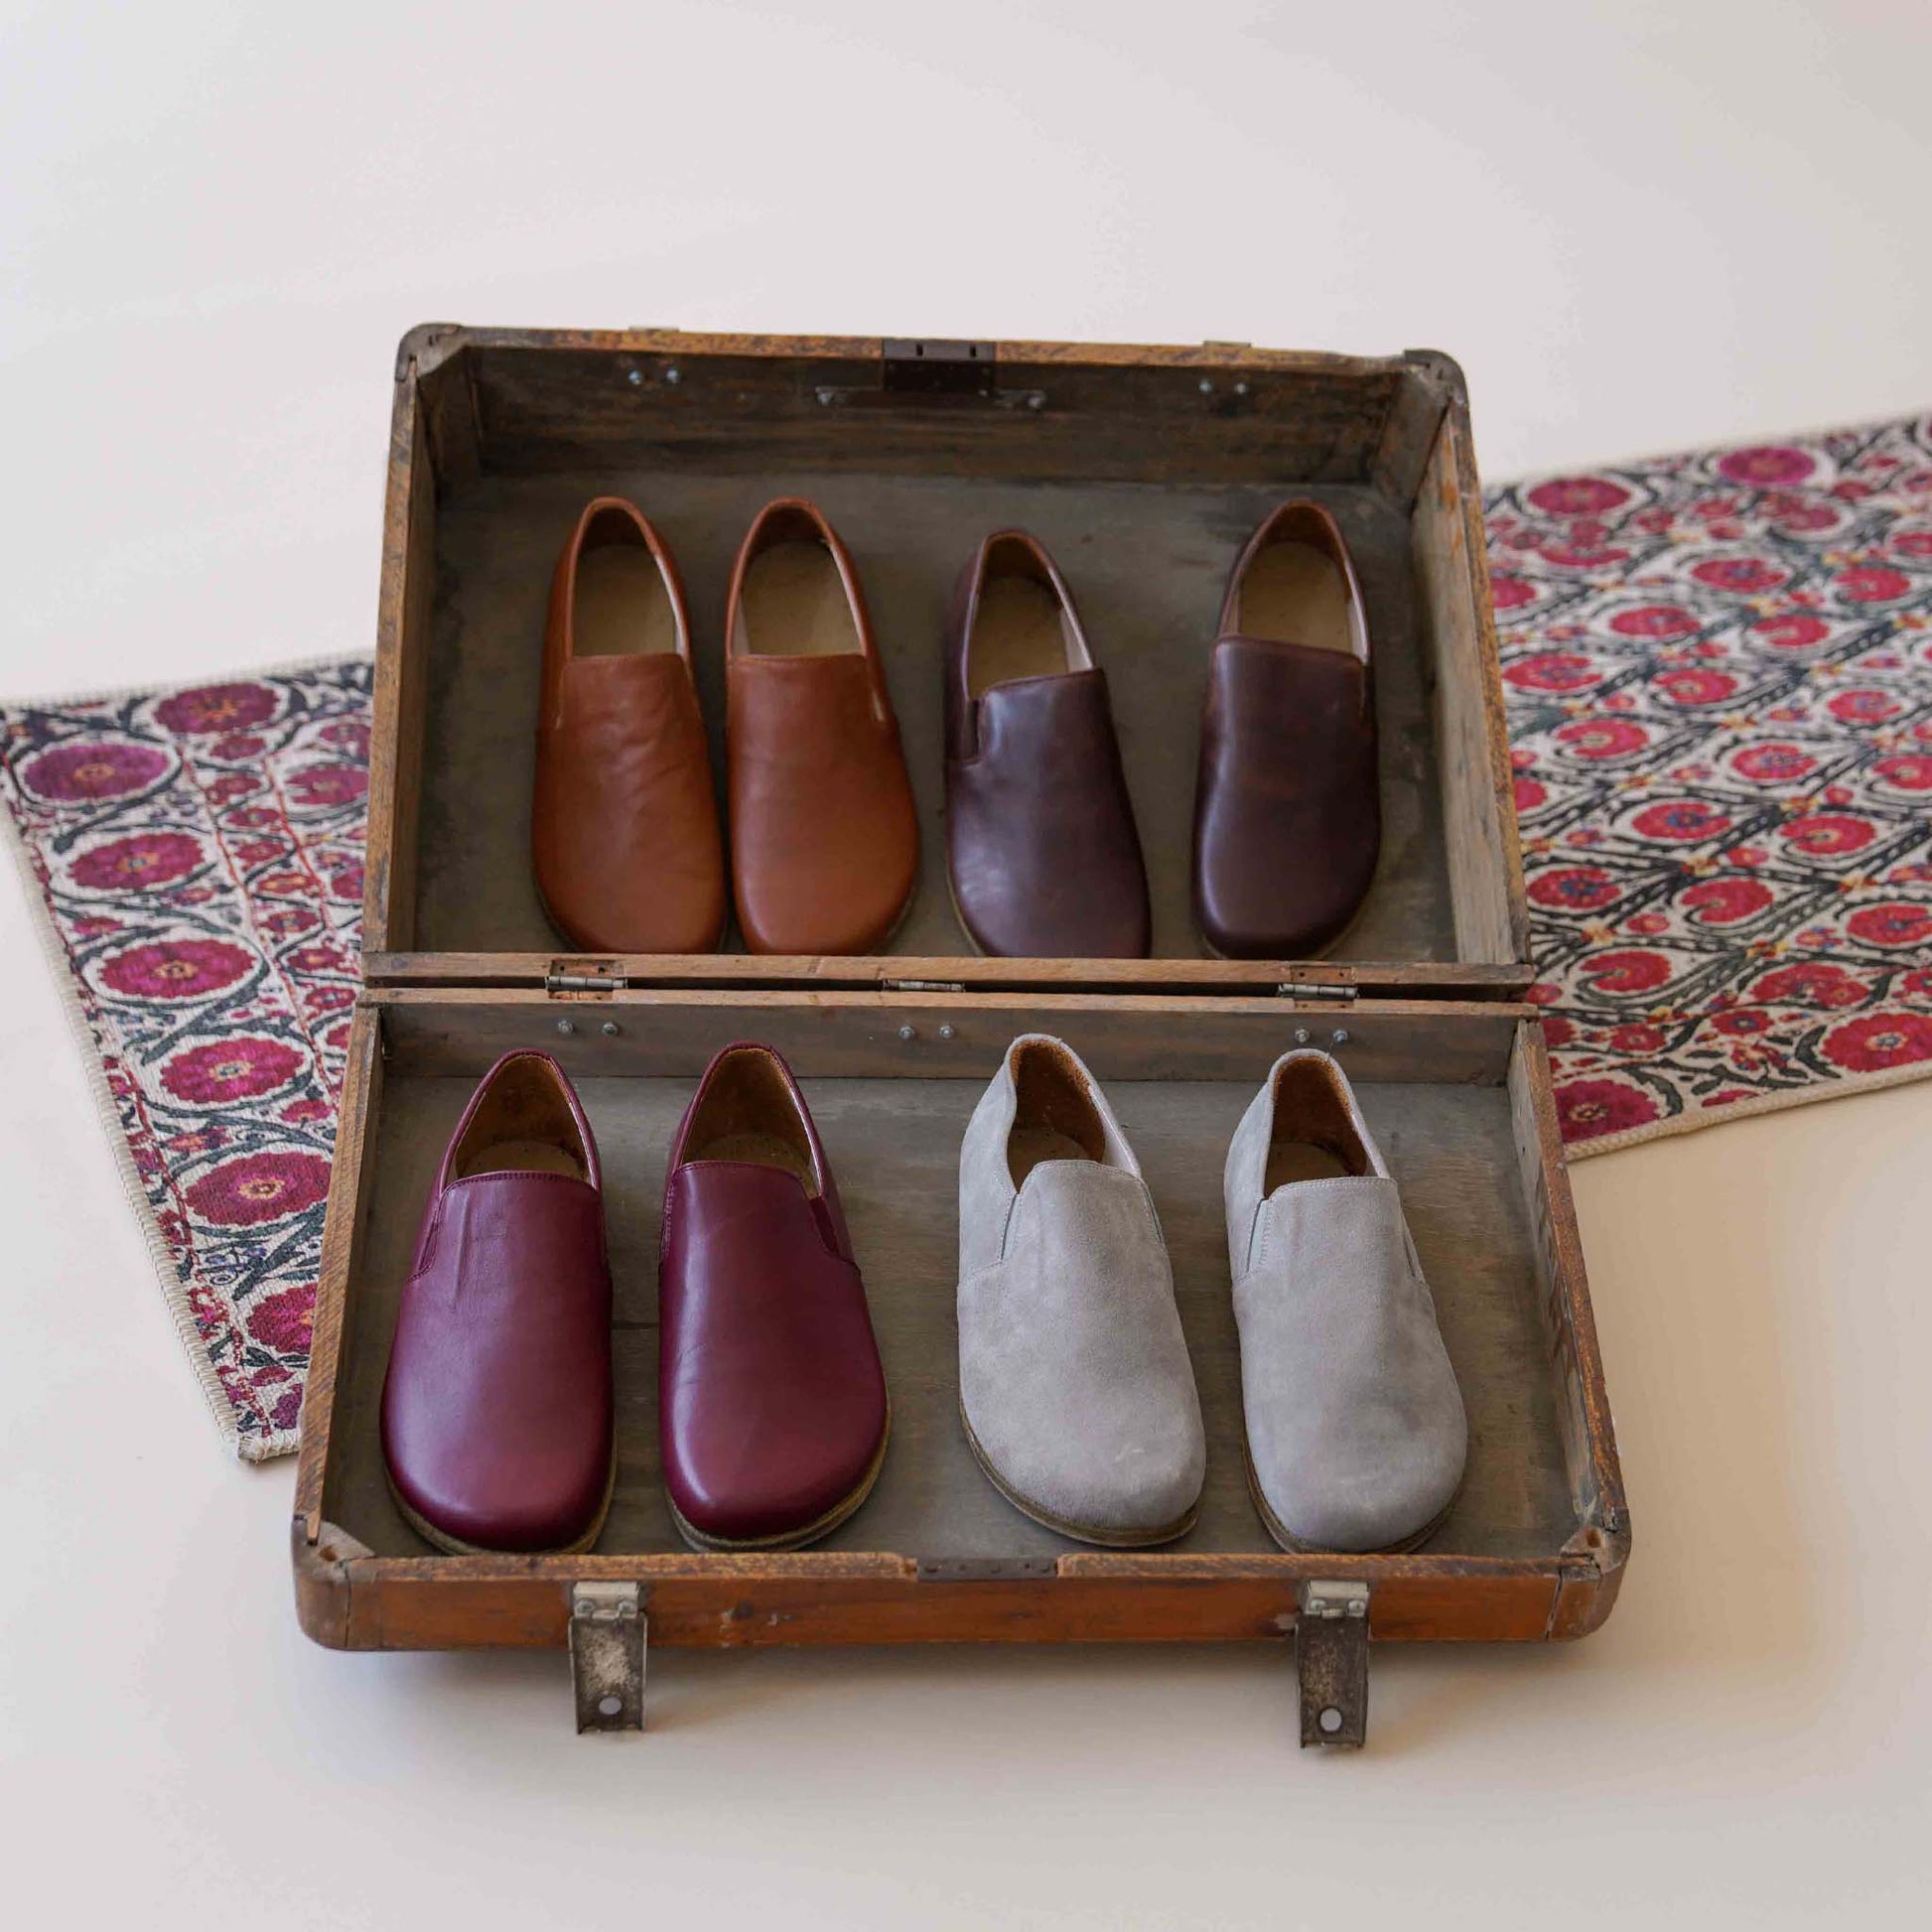 Vintage suitcase displaying Ionia Leather Barefoot Men Loafers in various colors, including burgundy, brown, and gray, emphasizing variety and style.